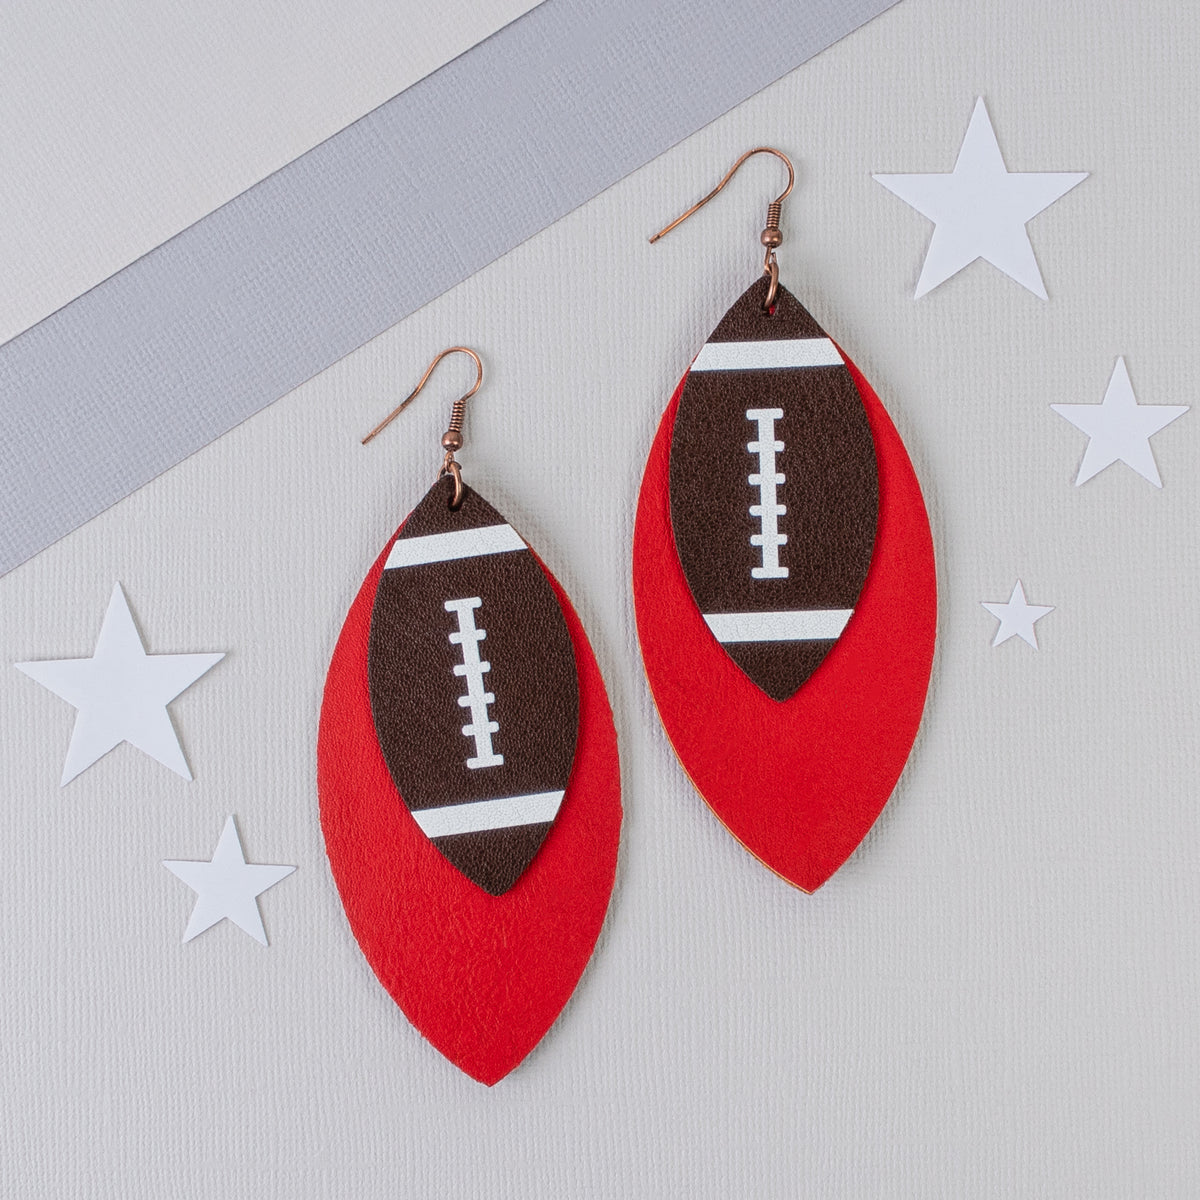 73754 - Football Earrings - Red - Fashion Jewelry Wholesale